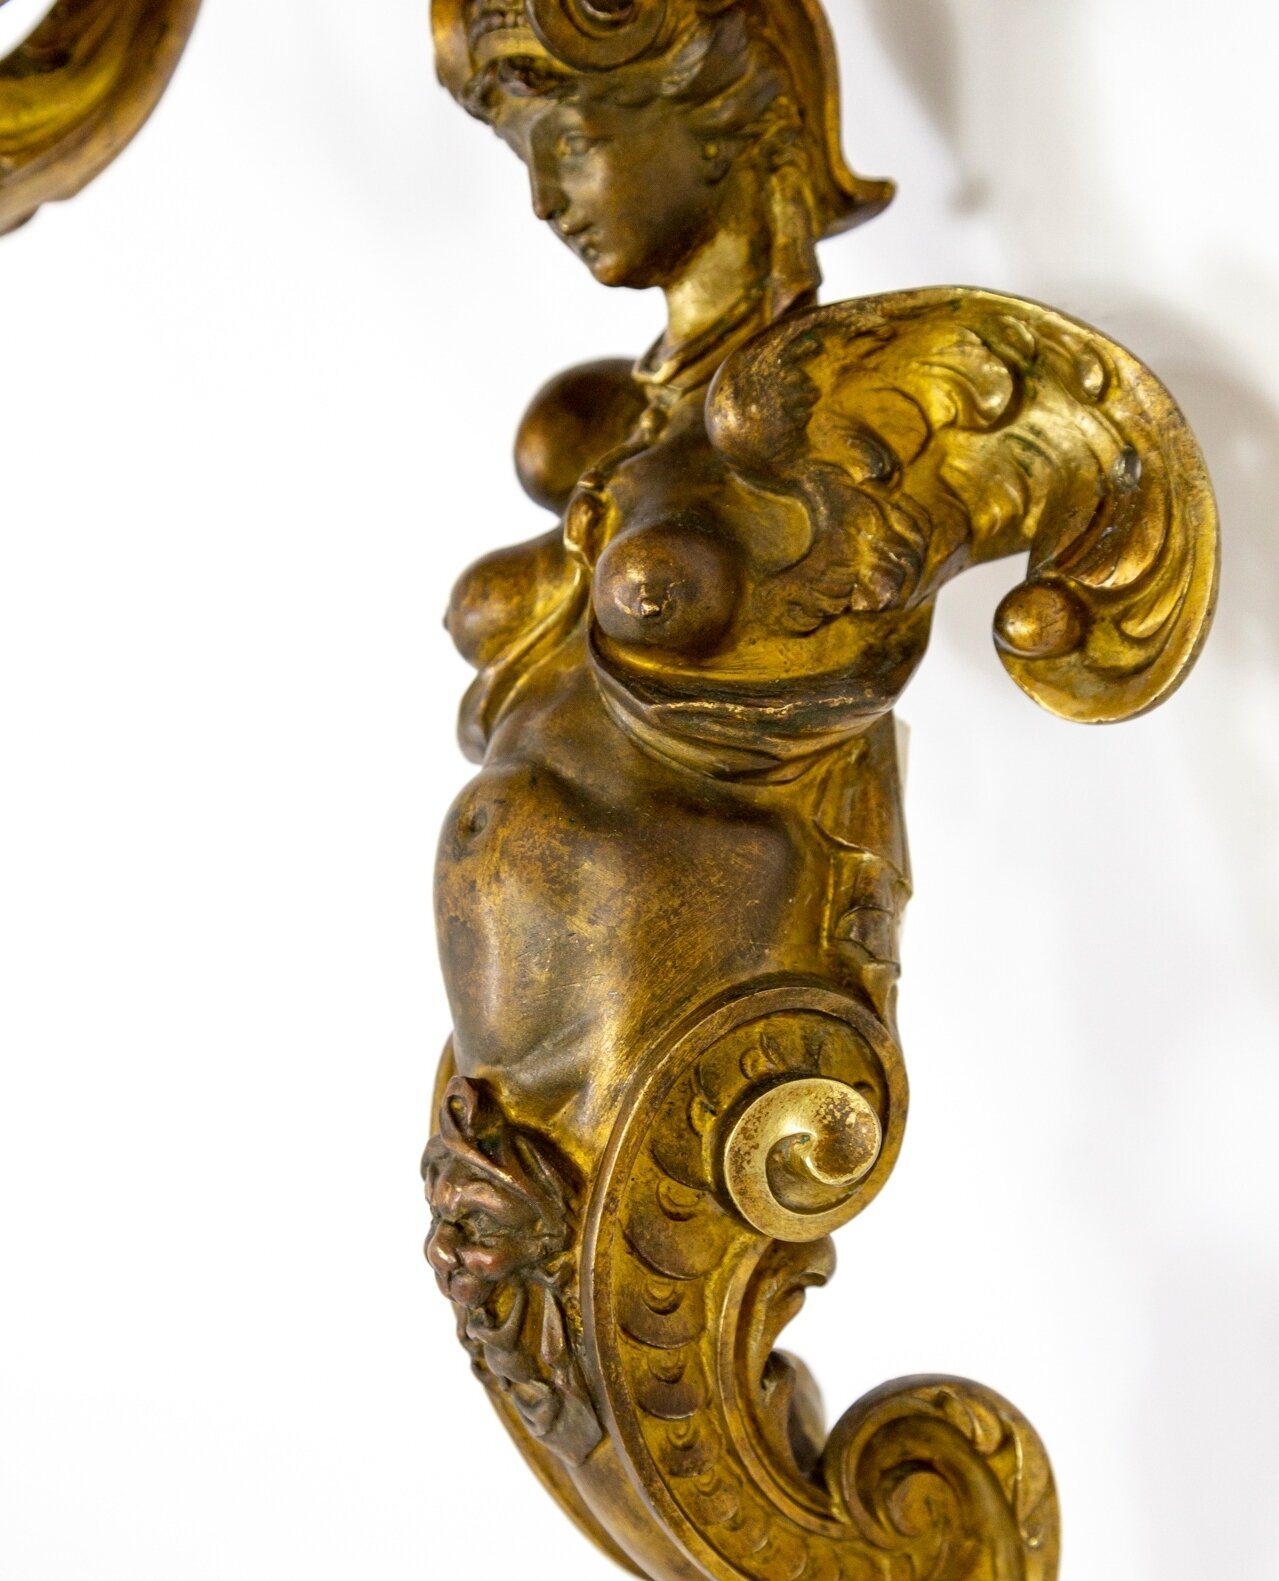 What a statue! You're seeing a cast bronze Melusina figure, a ⁠
mermaid with wings in European folklore described as a female spirit of fresh water. She is one of a pair of our sconces from the 1870s.⁠
⁠
For sale at Dogfork Lamp Arts. ⁠
⁠
Contact us 